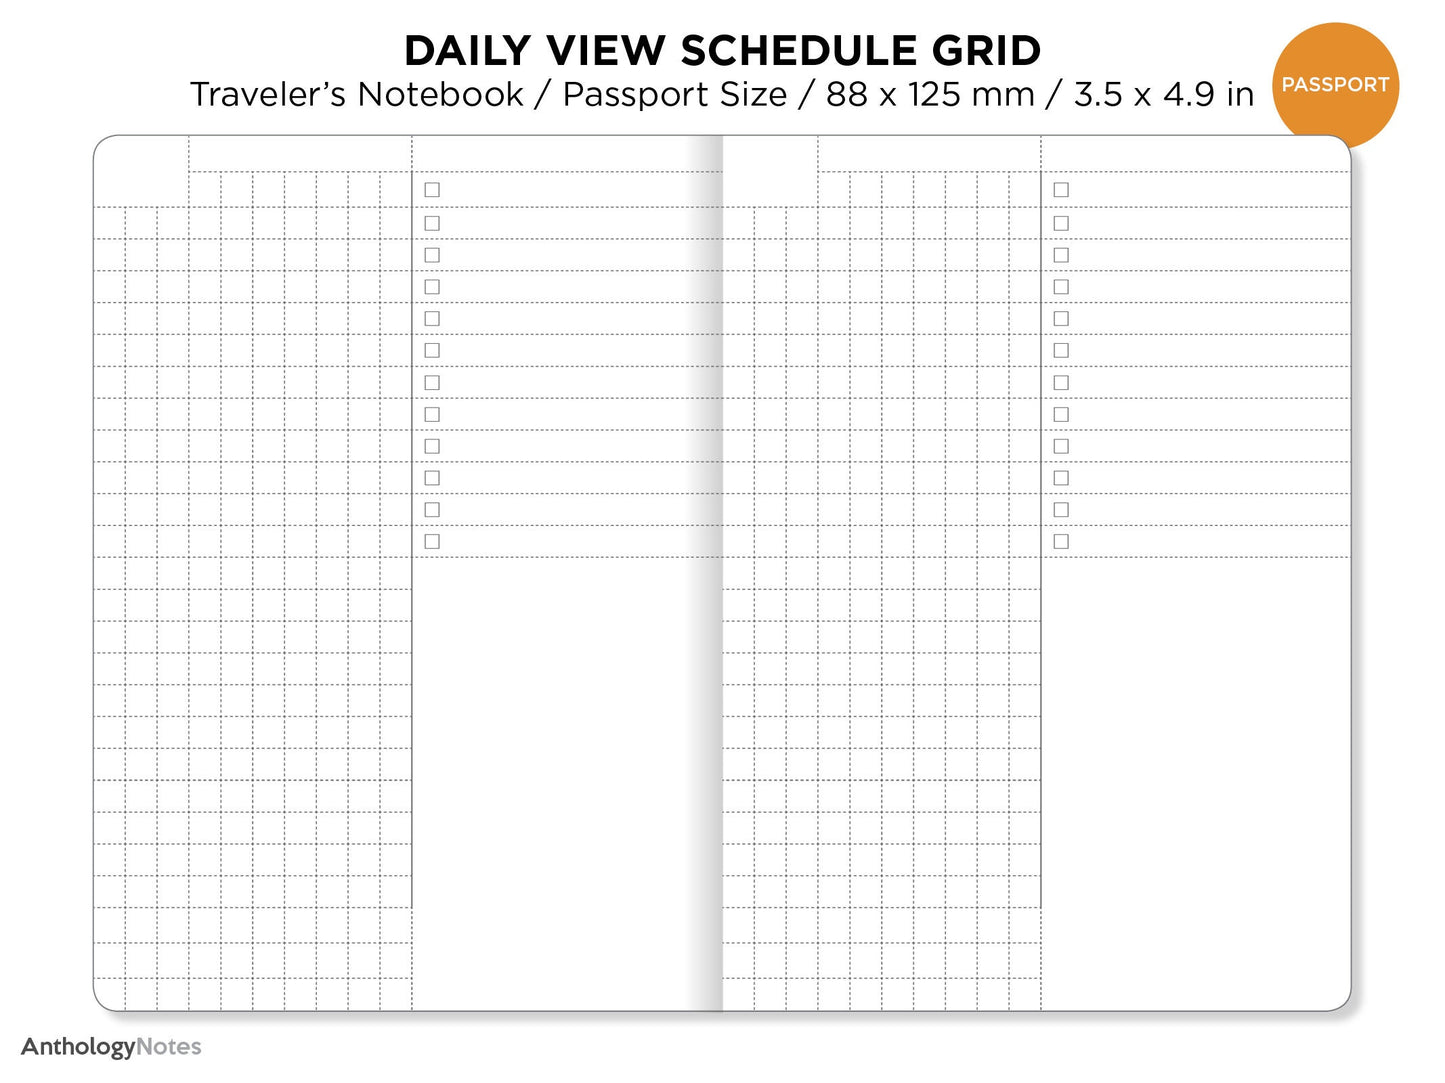 Passport DAILY GRID Traveler's Notebook Schedule Appointment Printable TN Insert